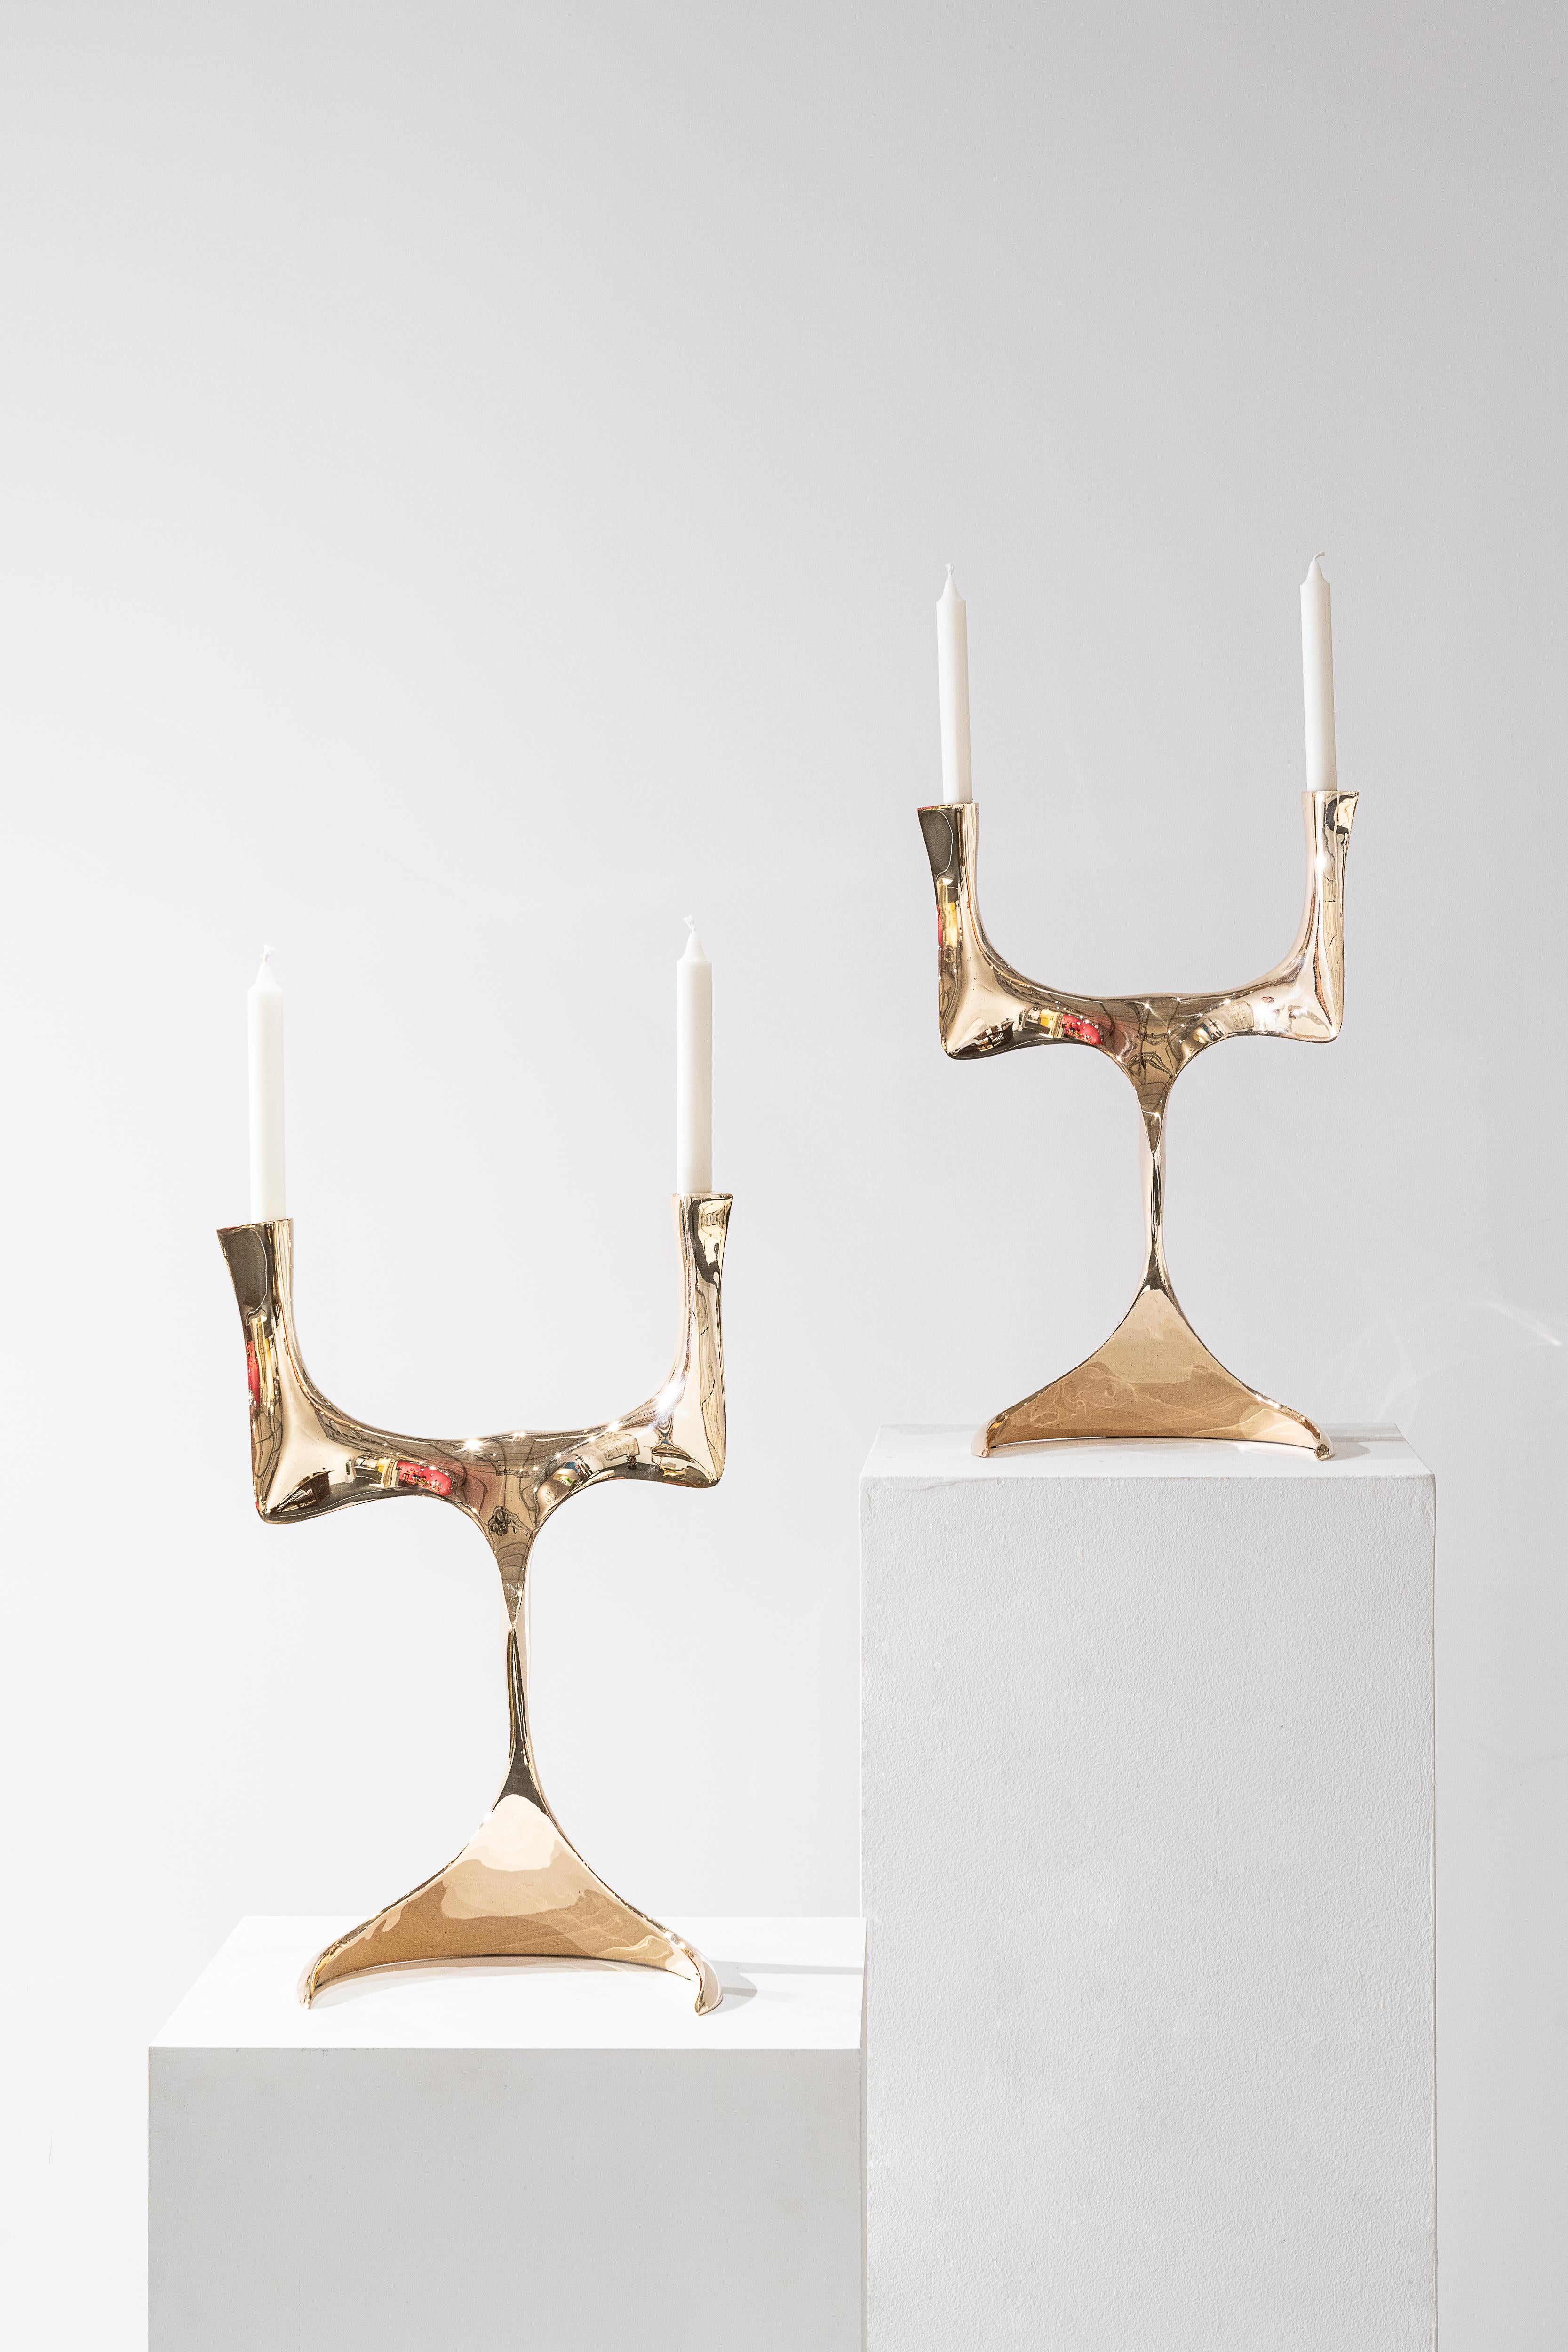 Elan Candlesticks by Pierre Salagnac
Material: Bronze, golden polish
Dimensions: H 47,5 x 30 x 24 cm
Year: 2023
Type: unique pieces, signed 

Revealing the organic curves of nature in the metal block with great talent, Pierre Salagnac has made a